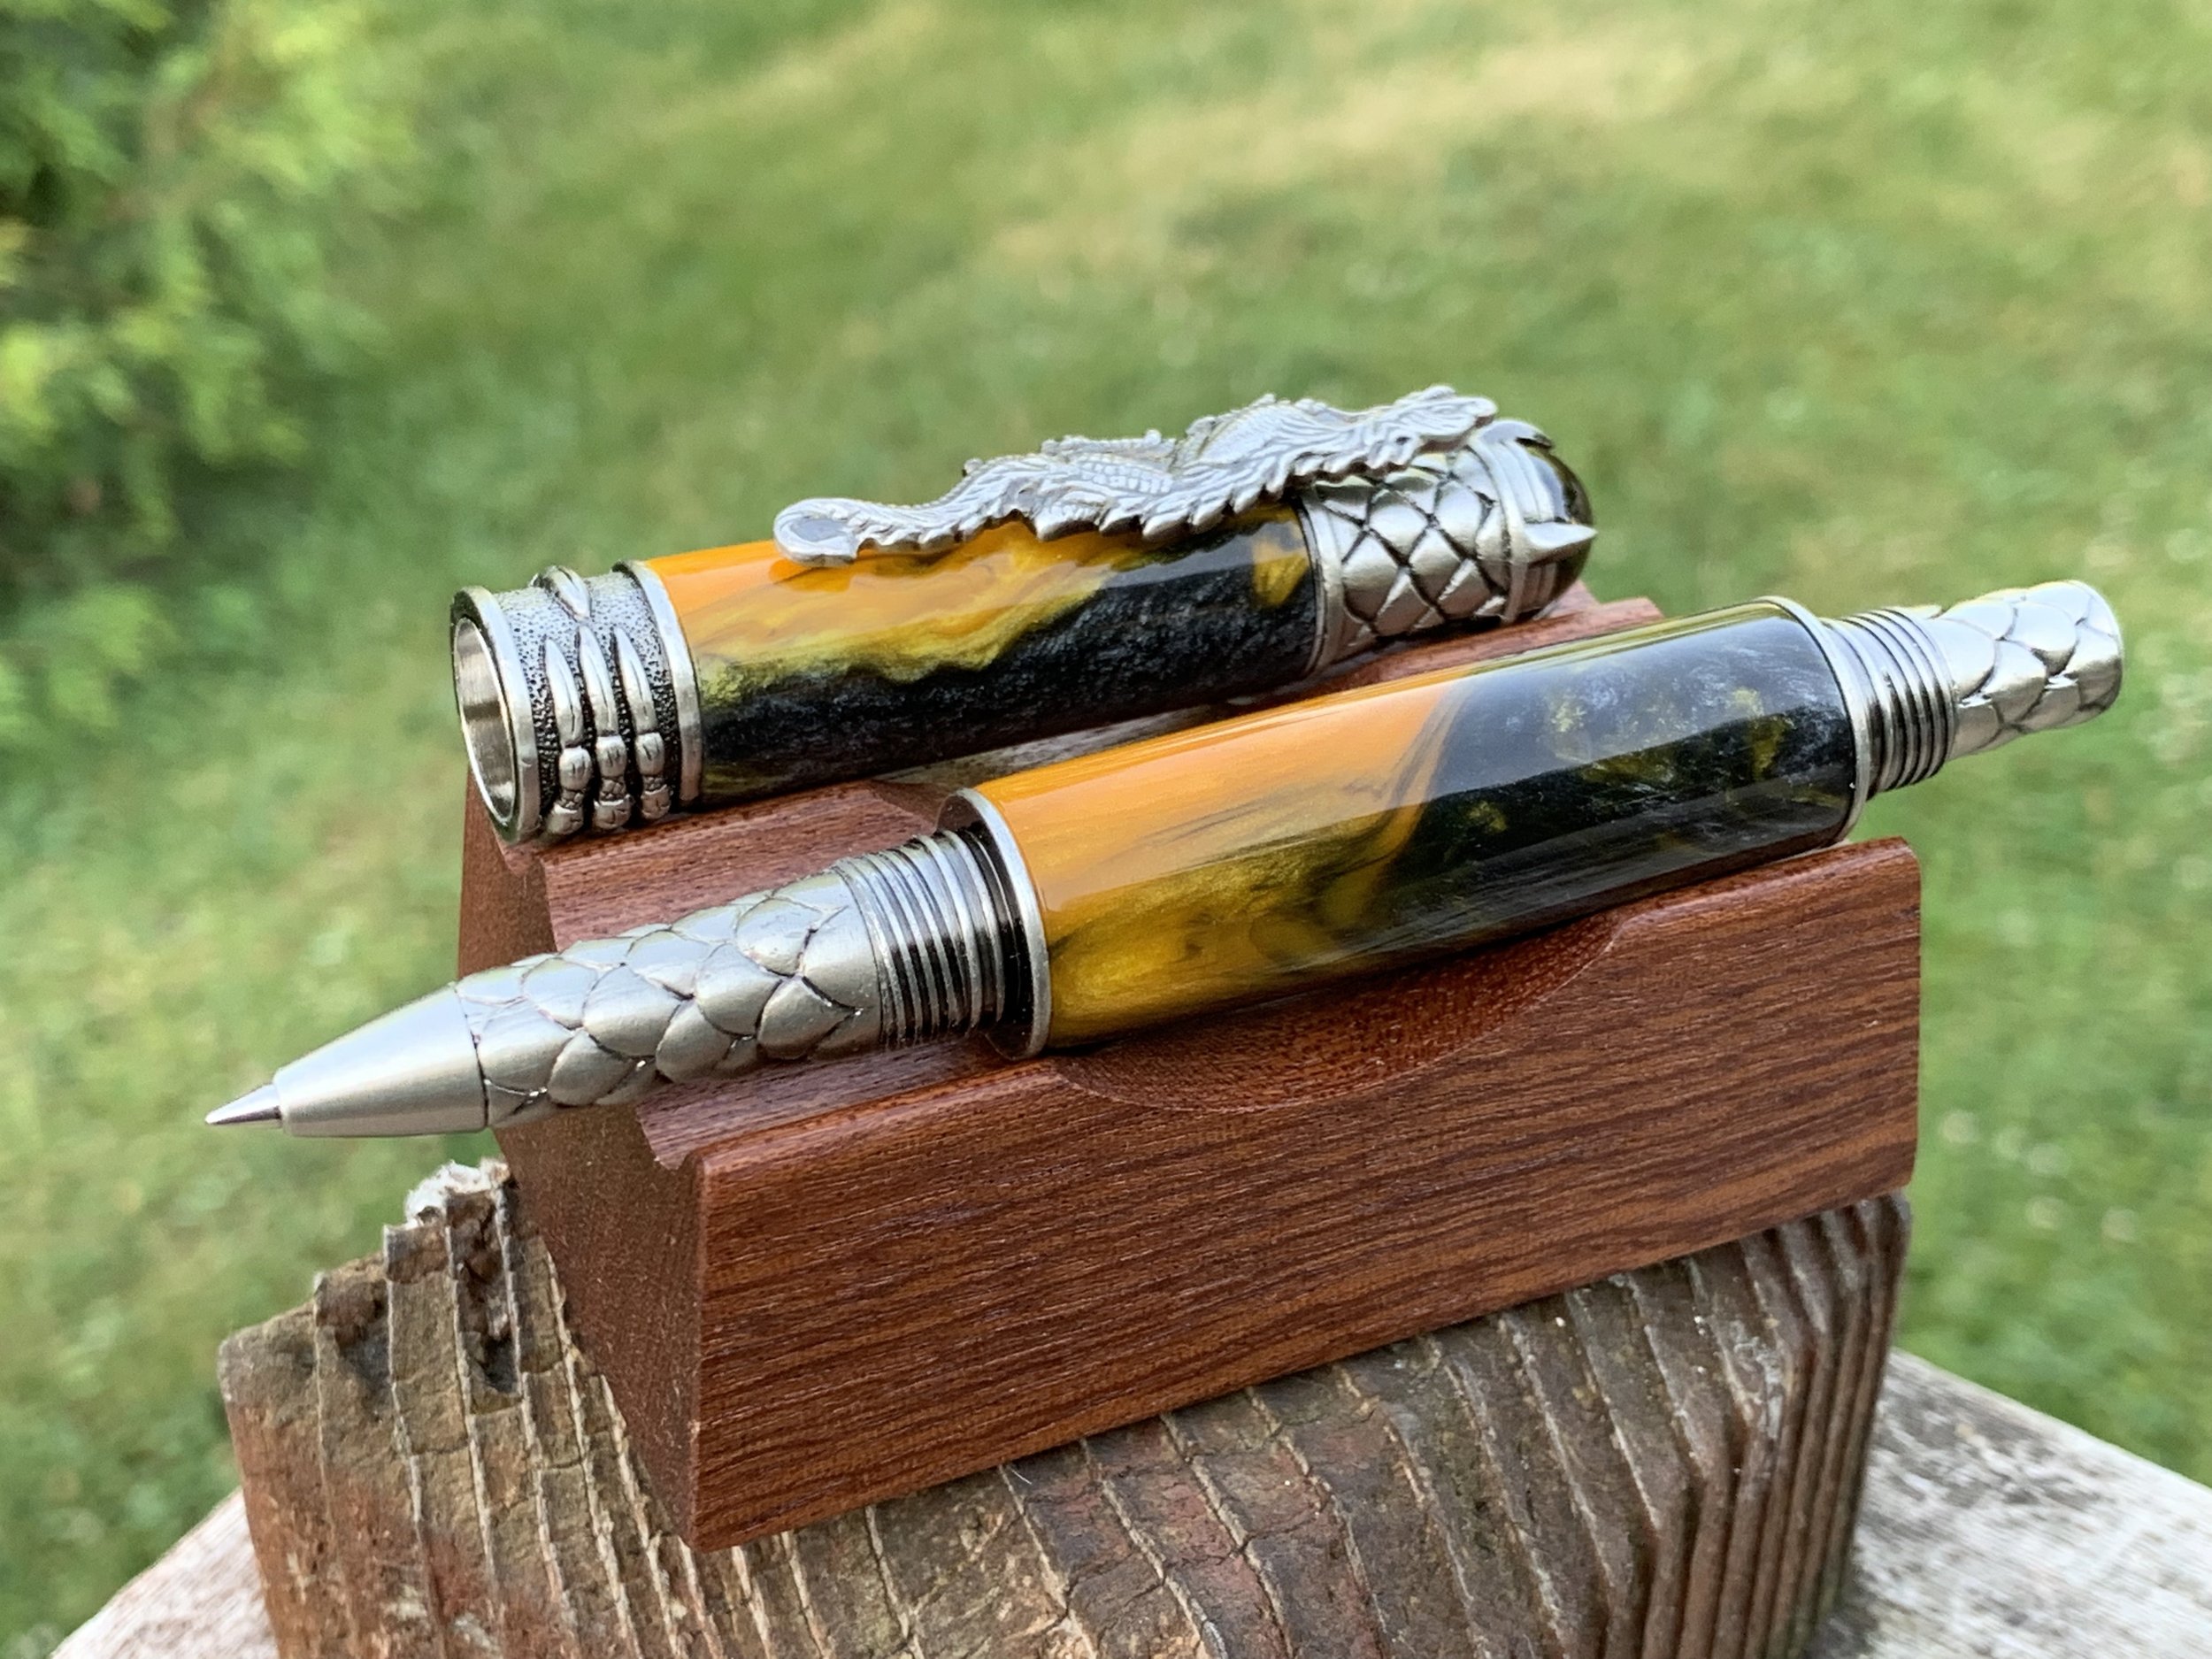 Dragon Rollerball - $60 - SOLD